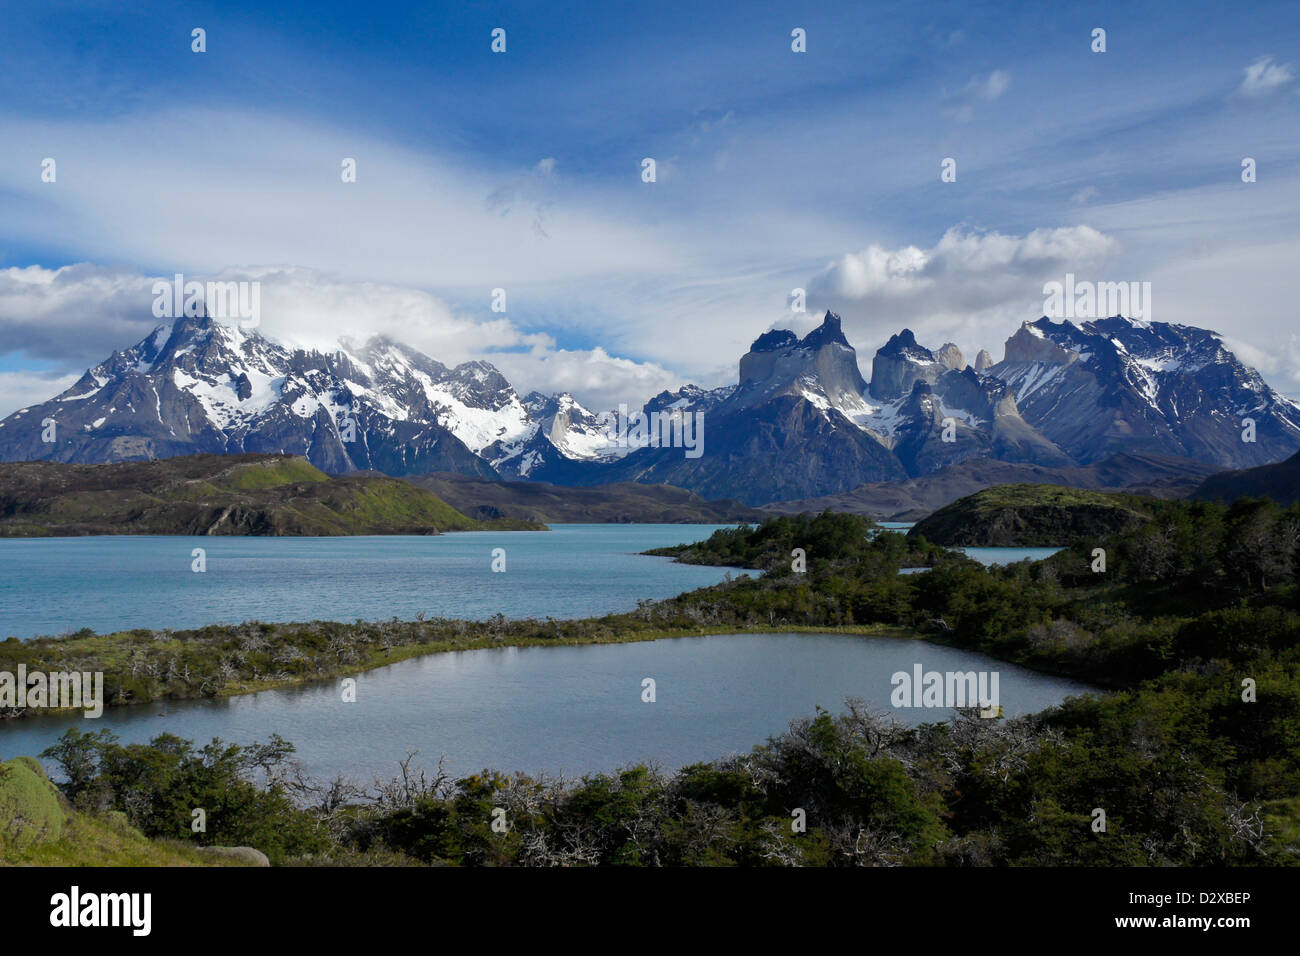 Lago Pehoe, Los Cuernos, and Paine Grande, Torres del Paine National Park, Patagonia, Chile Stock Photo